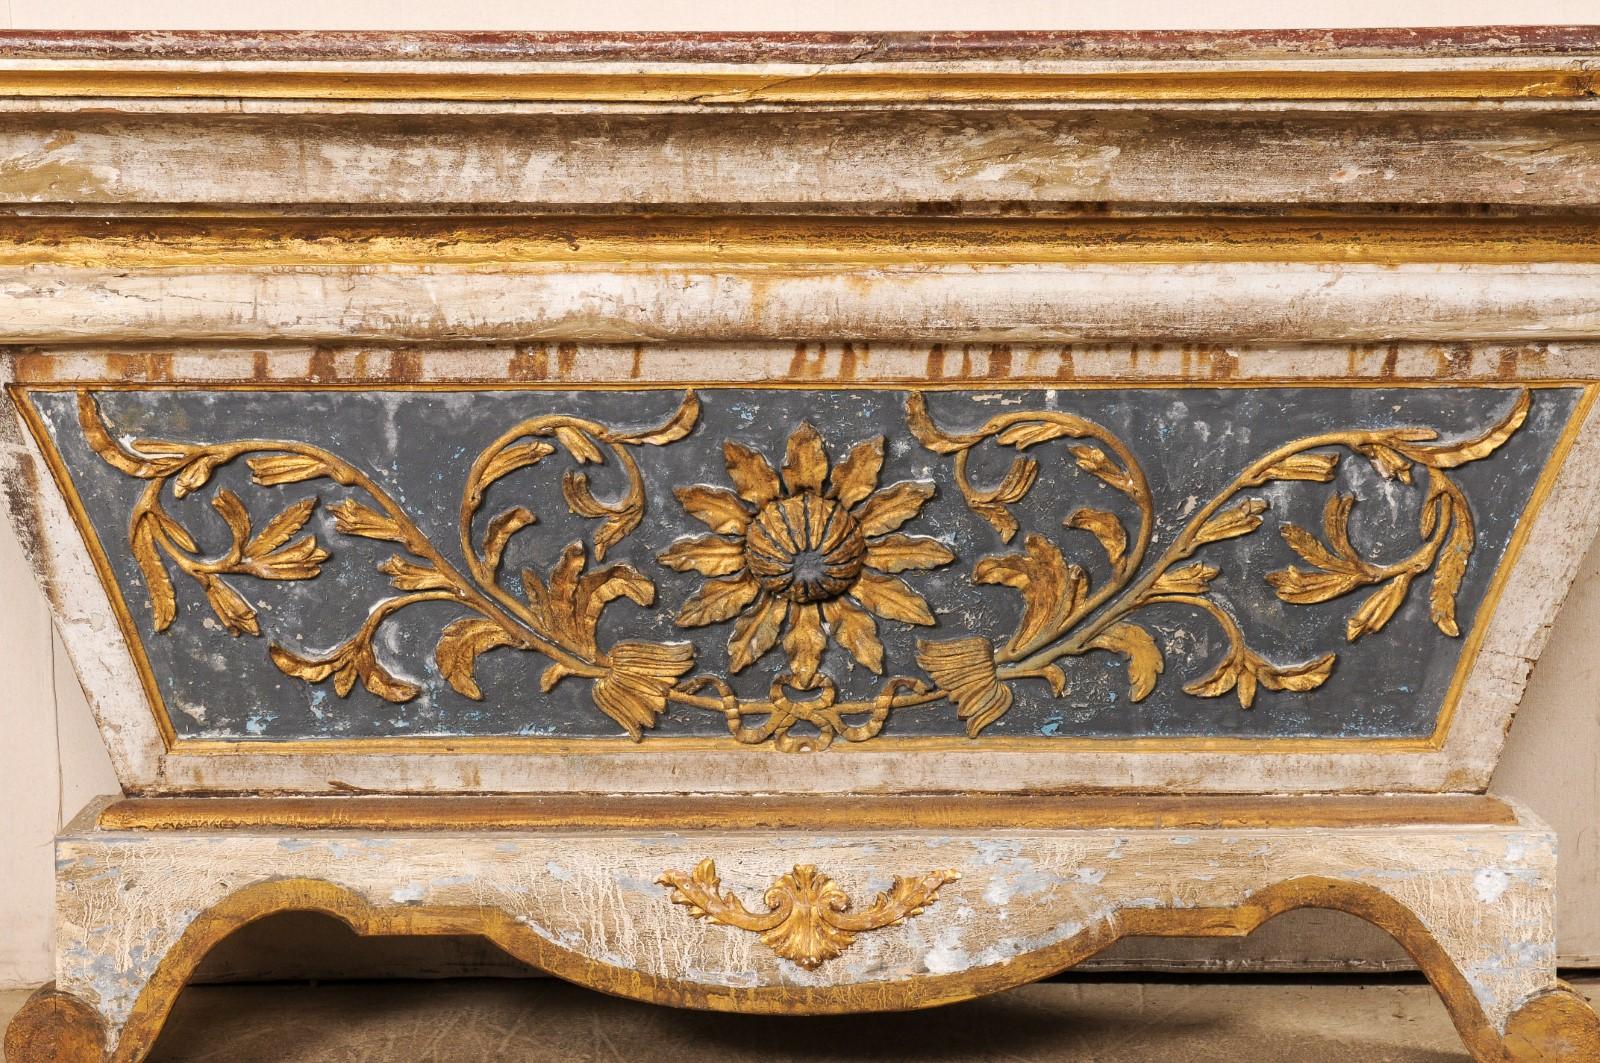 Wood 18th Century Italian Carved Altar, Now a Fabulous Wall-Mounted Console